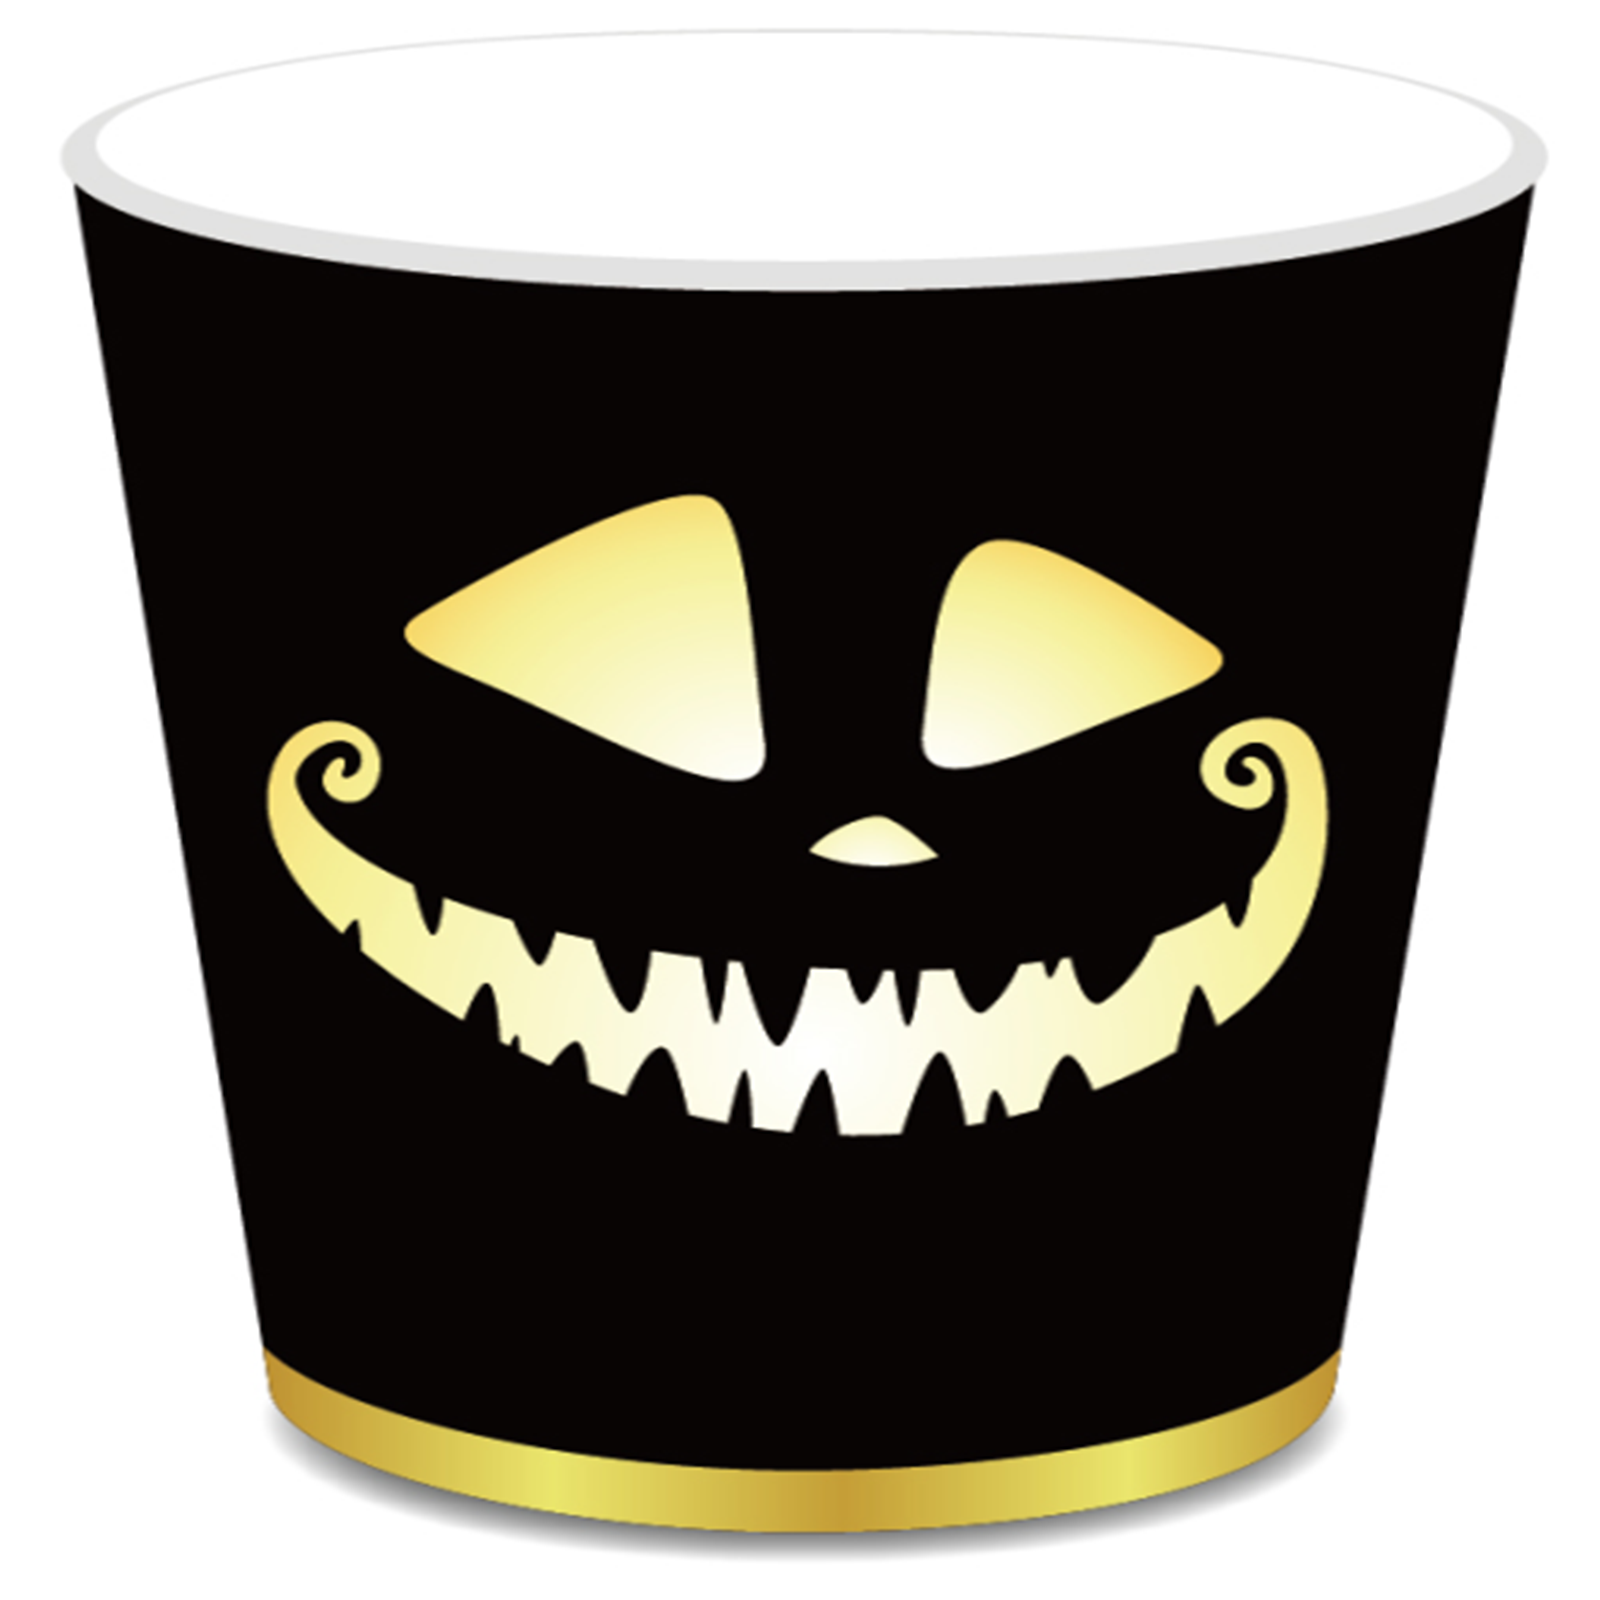 ZNTS Halloween Pumpkin Blood Hand Bat Paper Plates Party Supplie Plates and Napkins Birthday Disposable 80392471